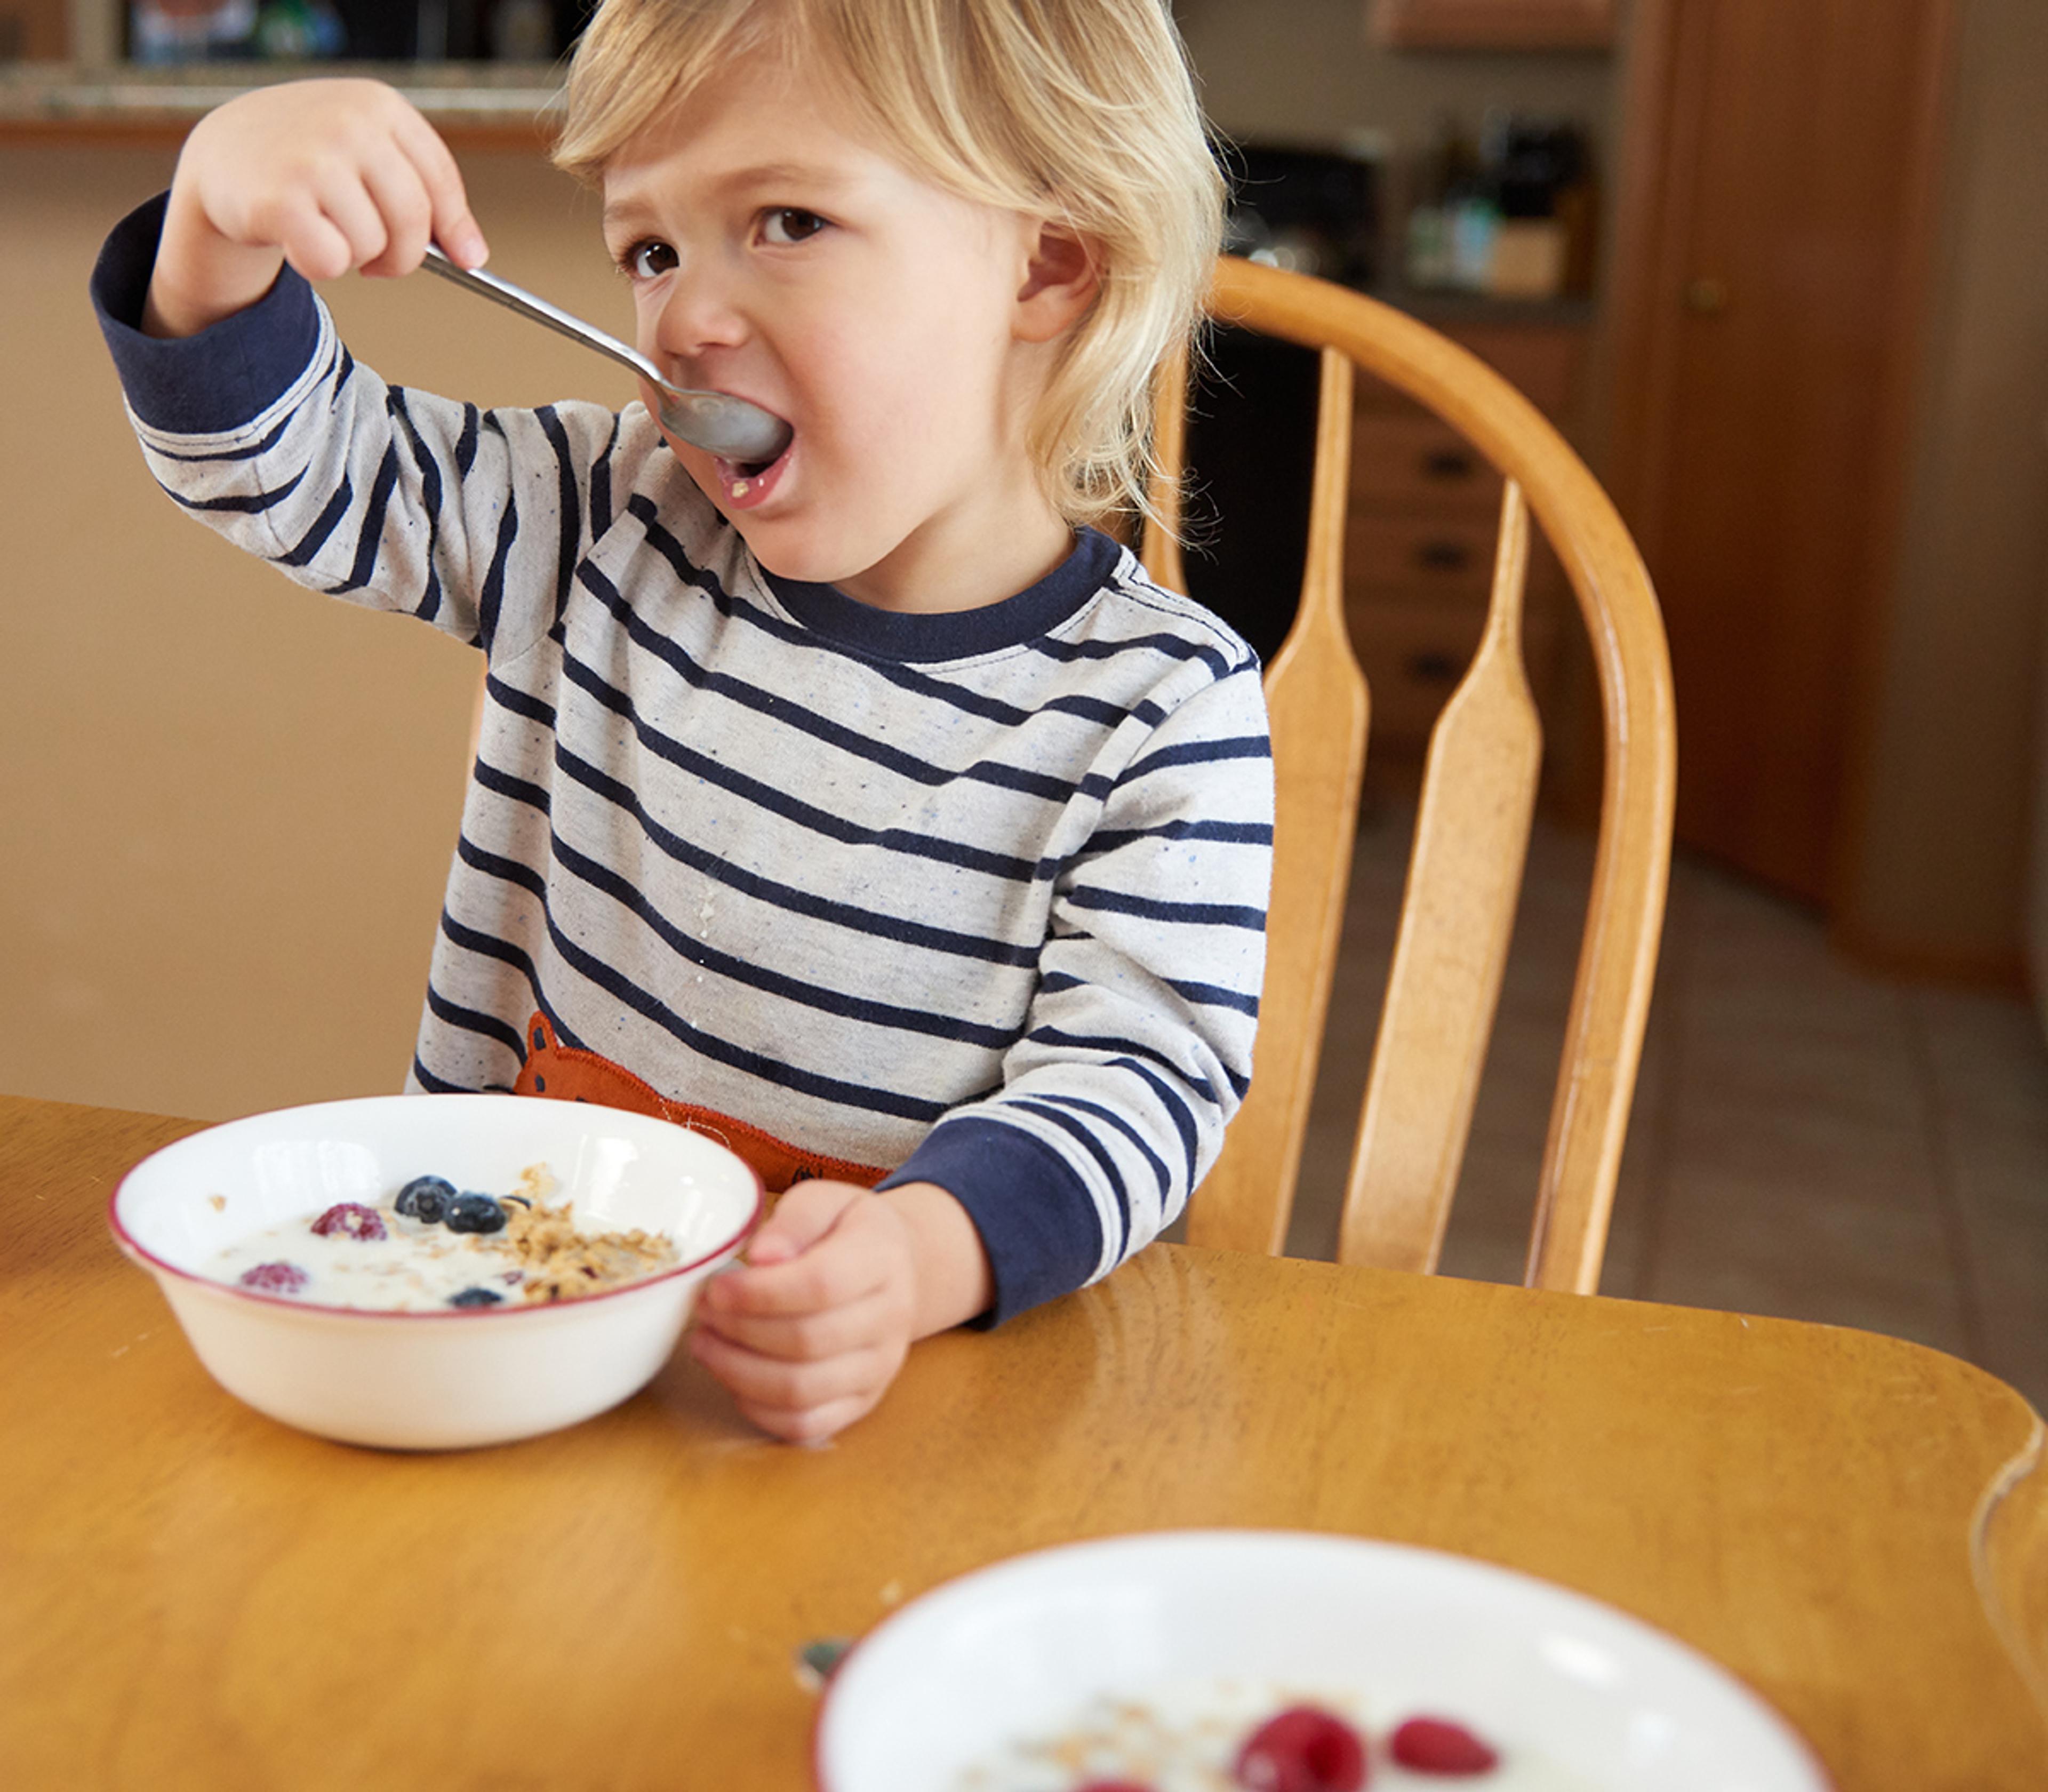 A little boy eats a bowl of cereal topped with fresh berries.